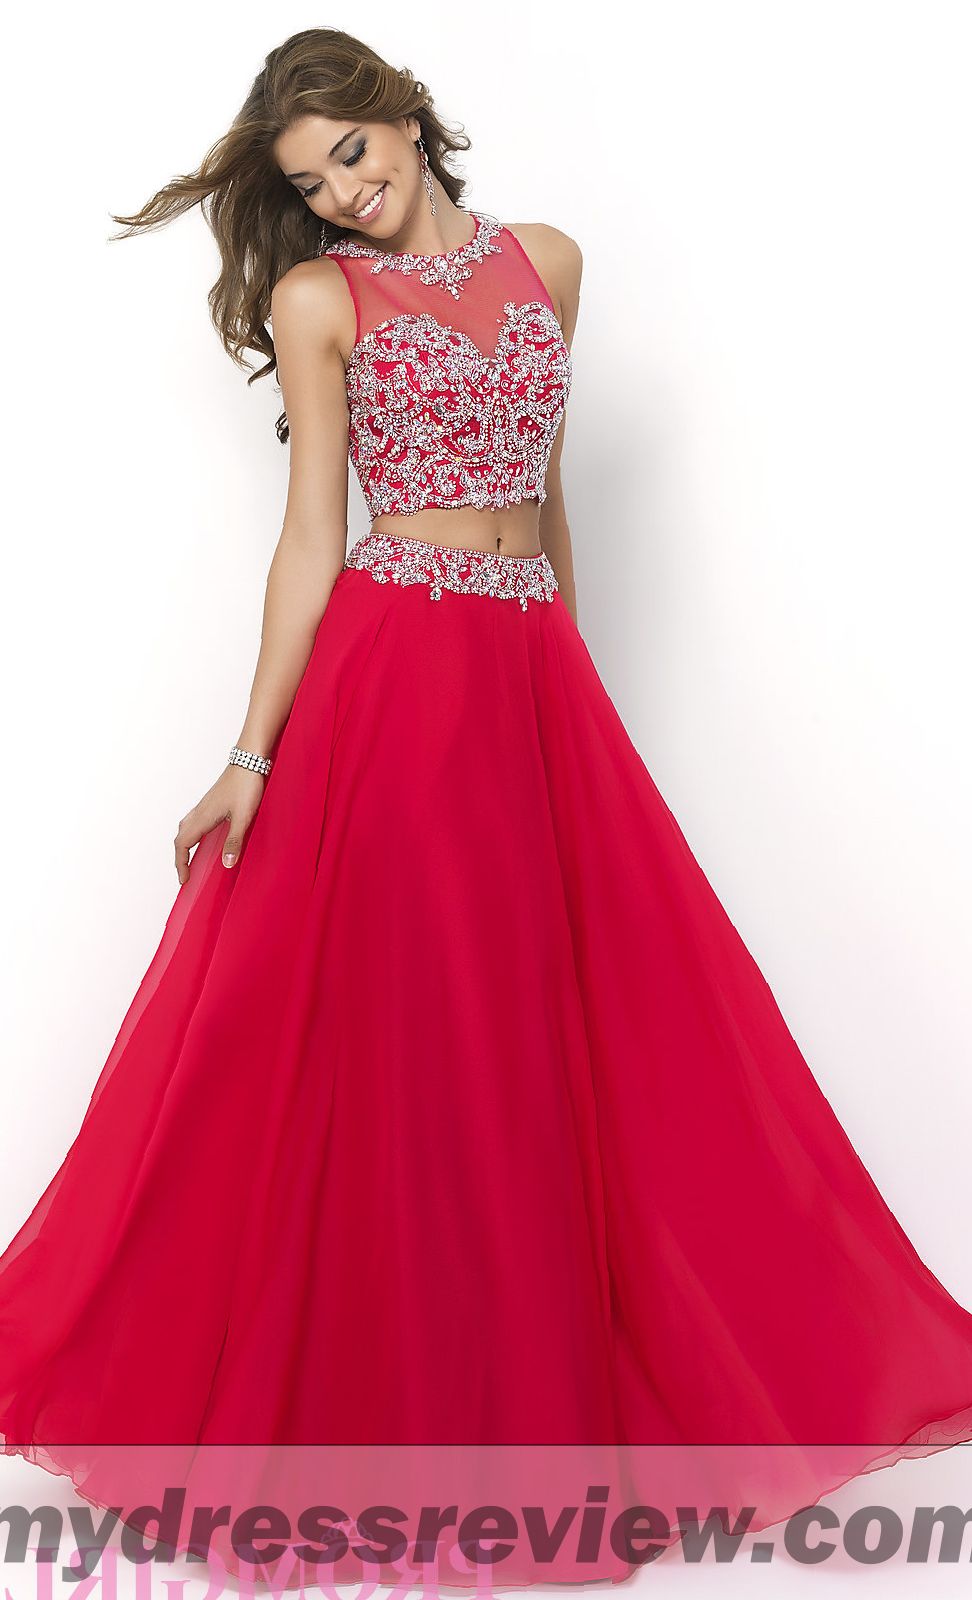 Blush 2 Piece Prom Dress - Things To Know Before Choosing